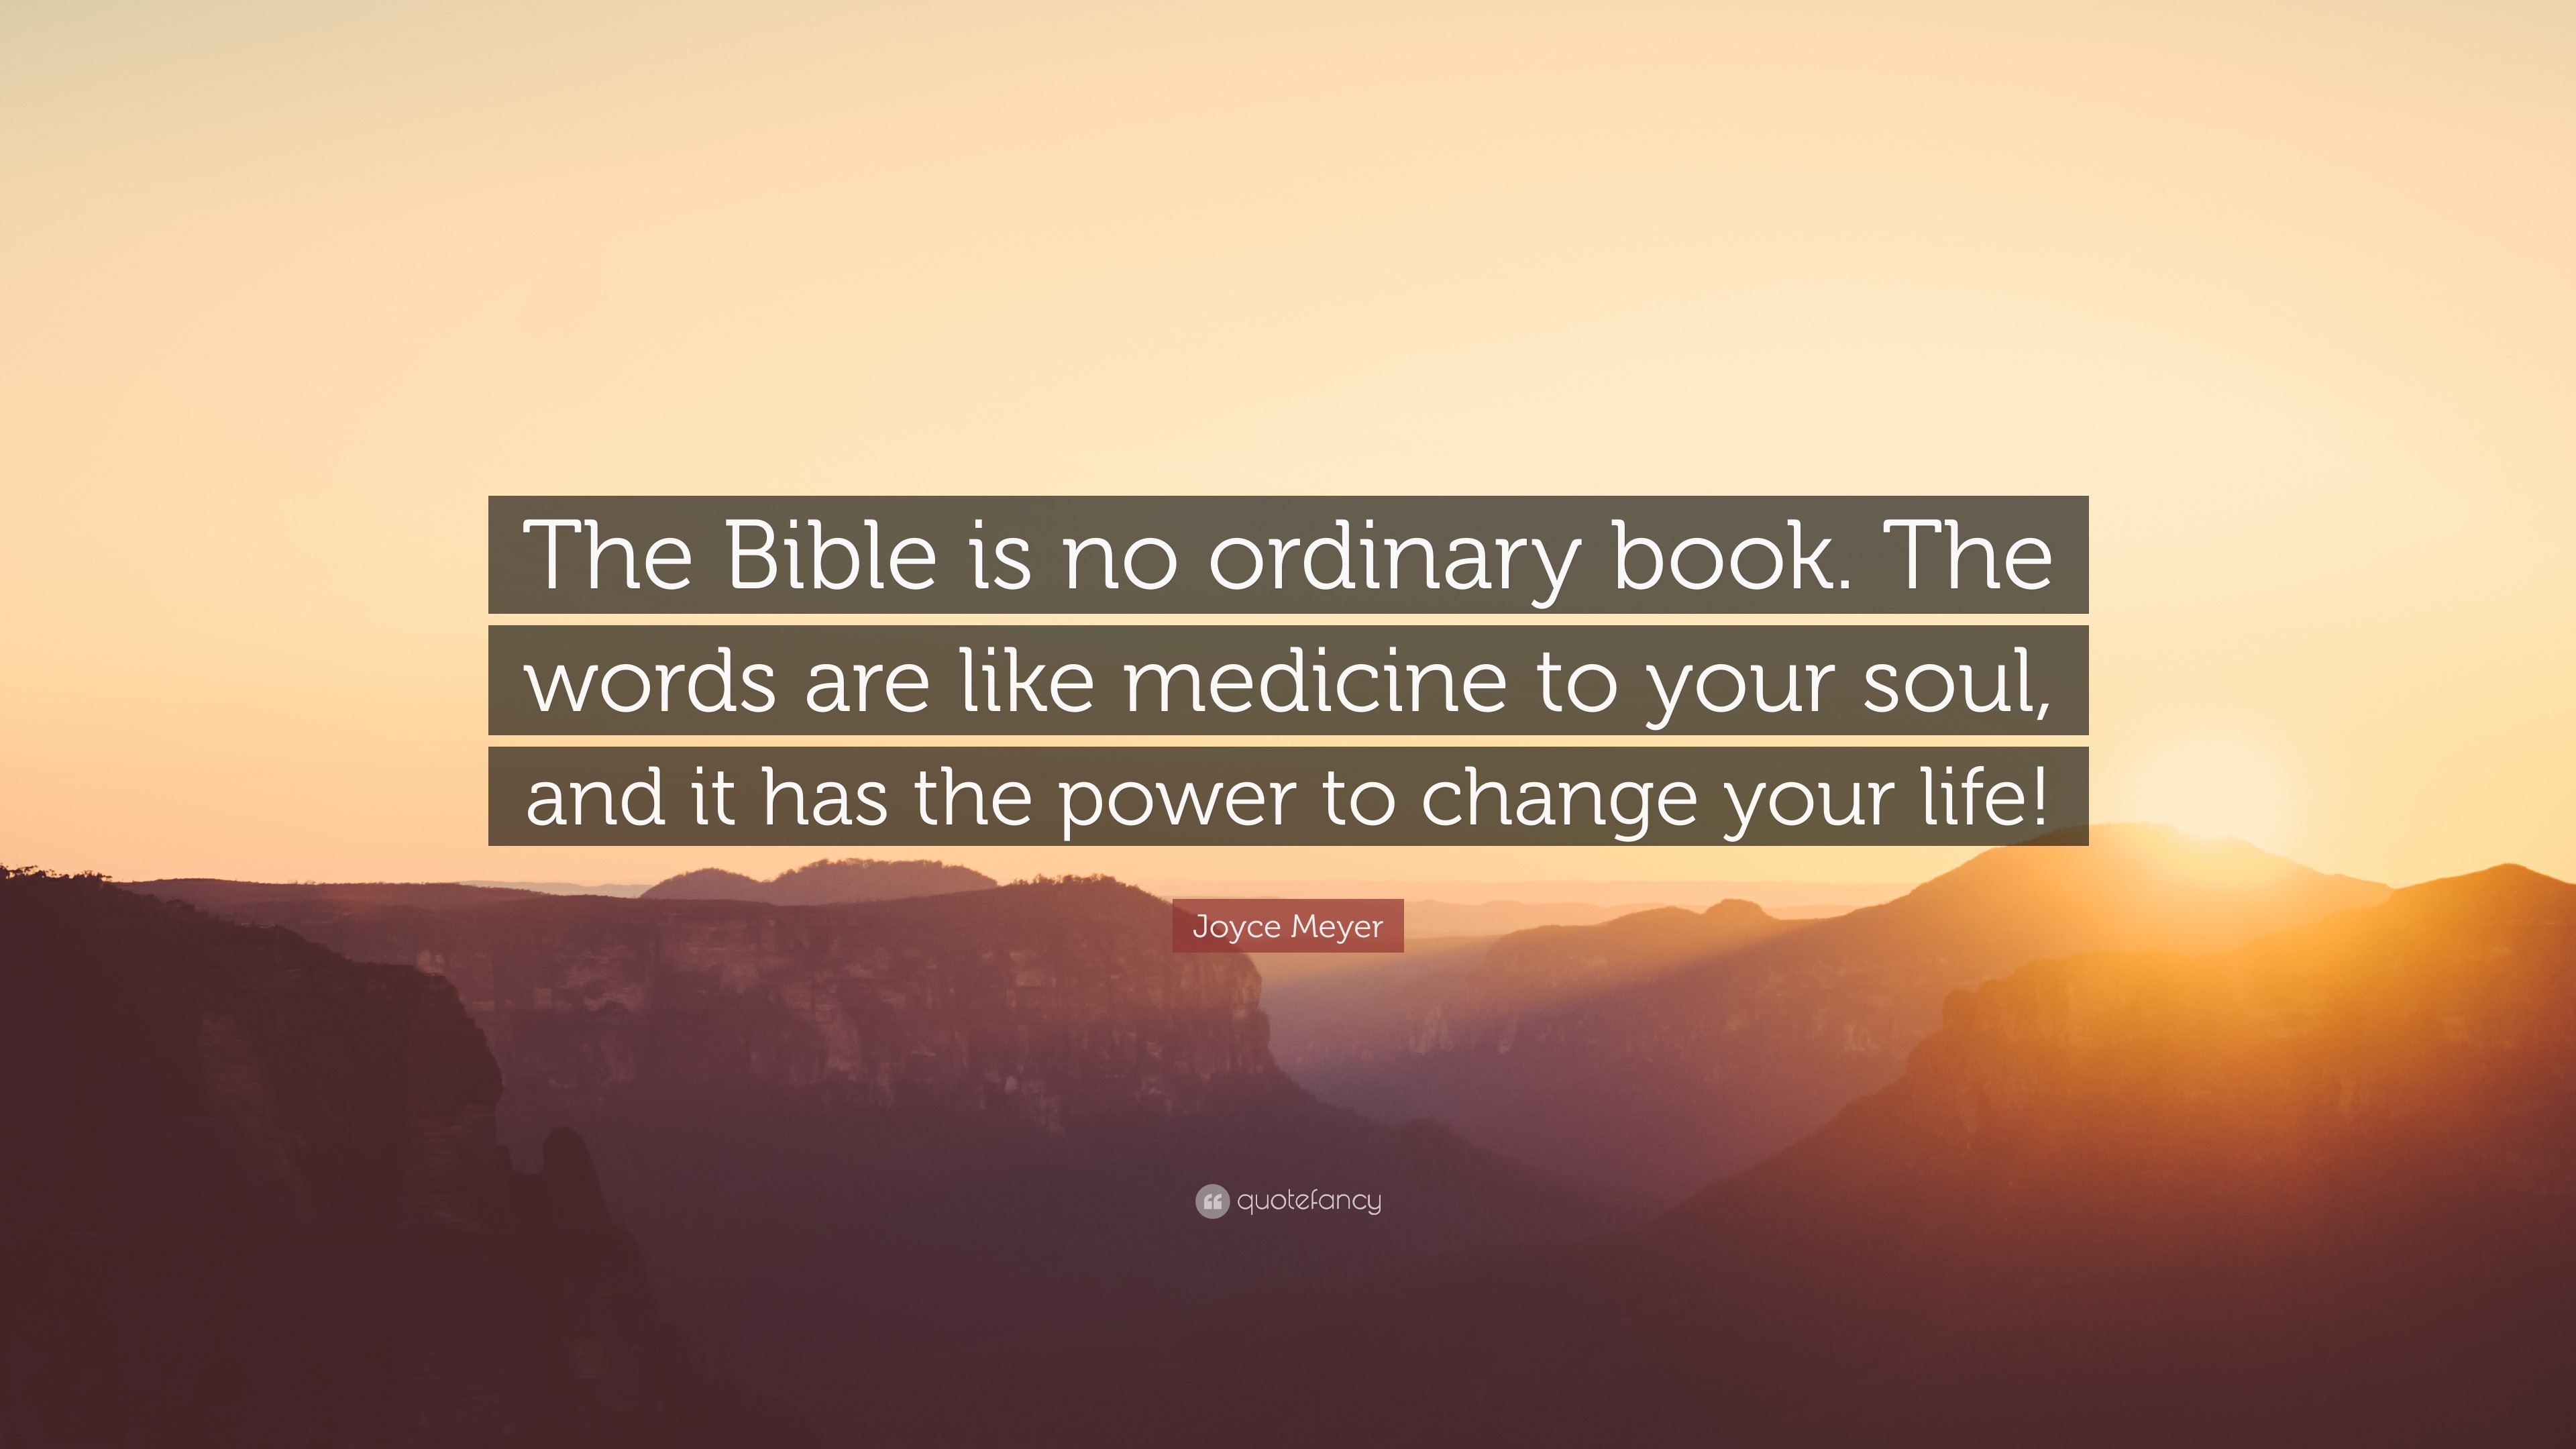 Joyce Meyer Quote “The Bible is no ordinary book The words are like